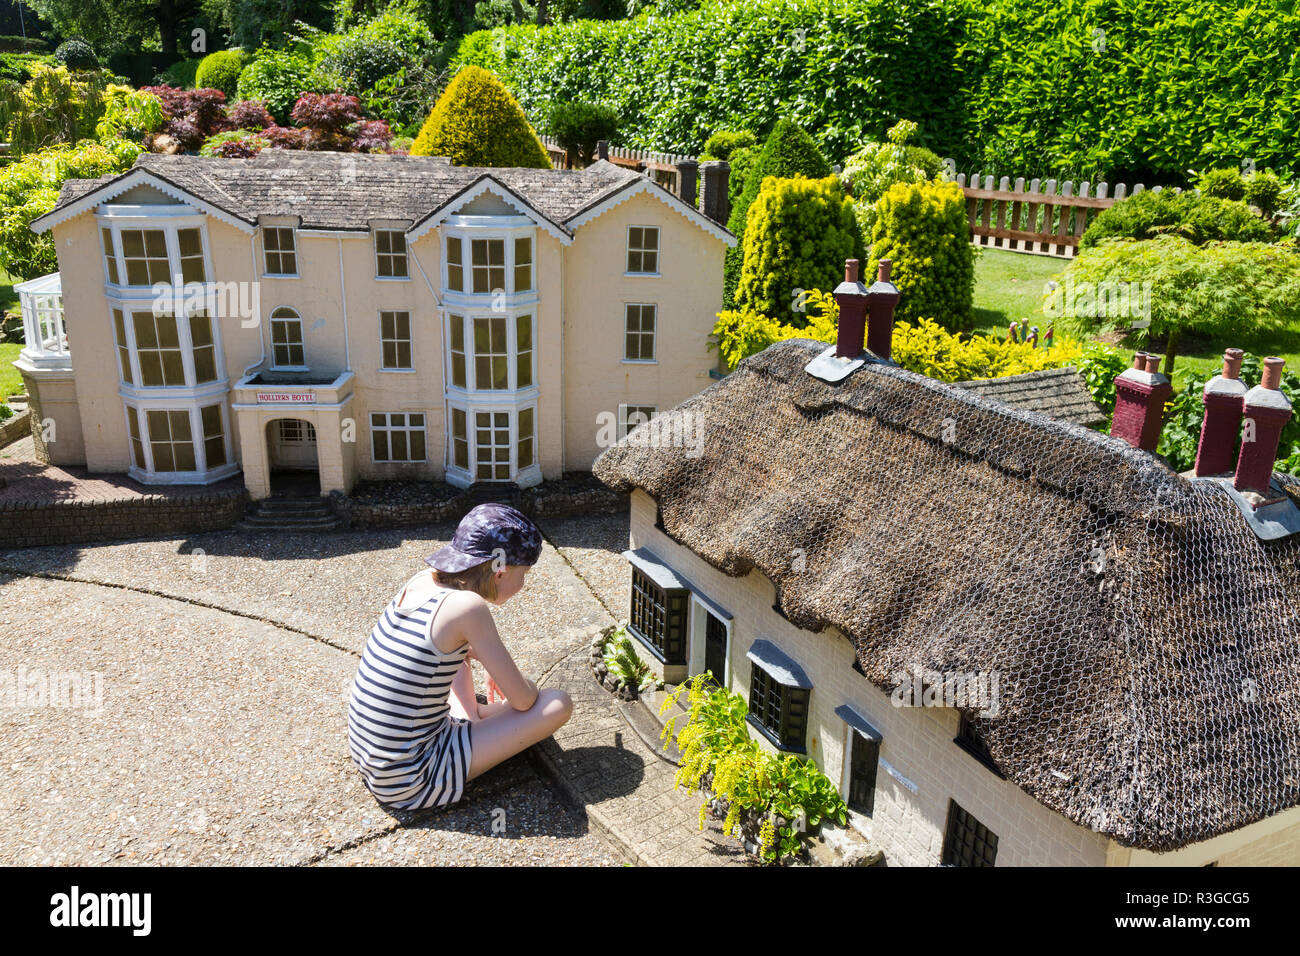 Girl / girls / child / children / kid / kids explore the Model Village at Godshill on the Isle of Wight, on a sunny day with blue sky / skies. (98) Stock Photo